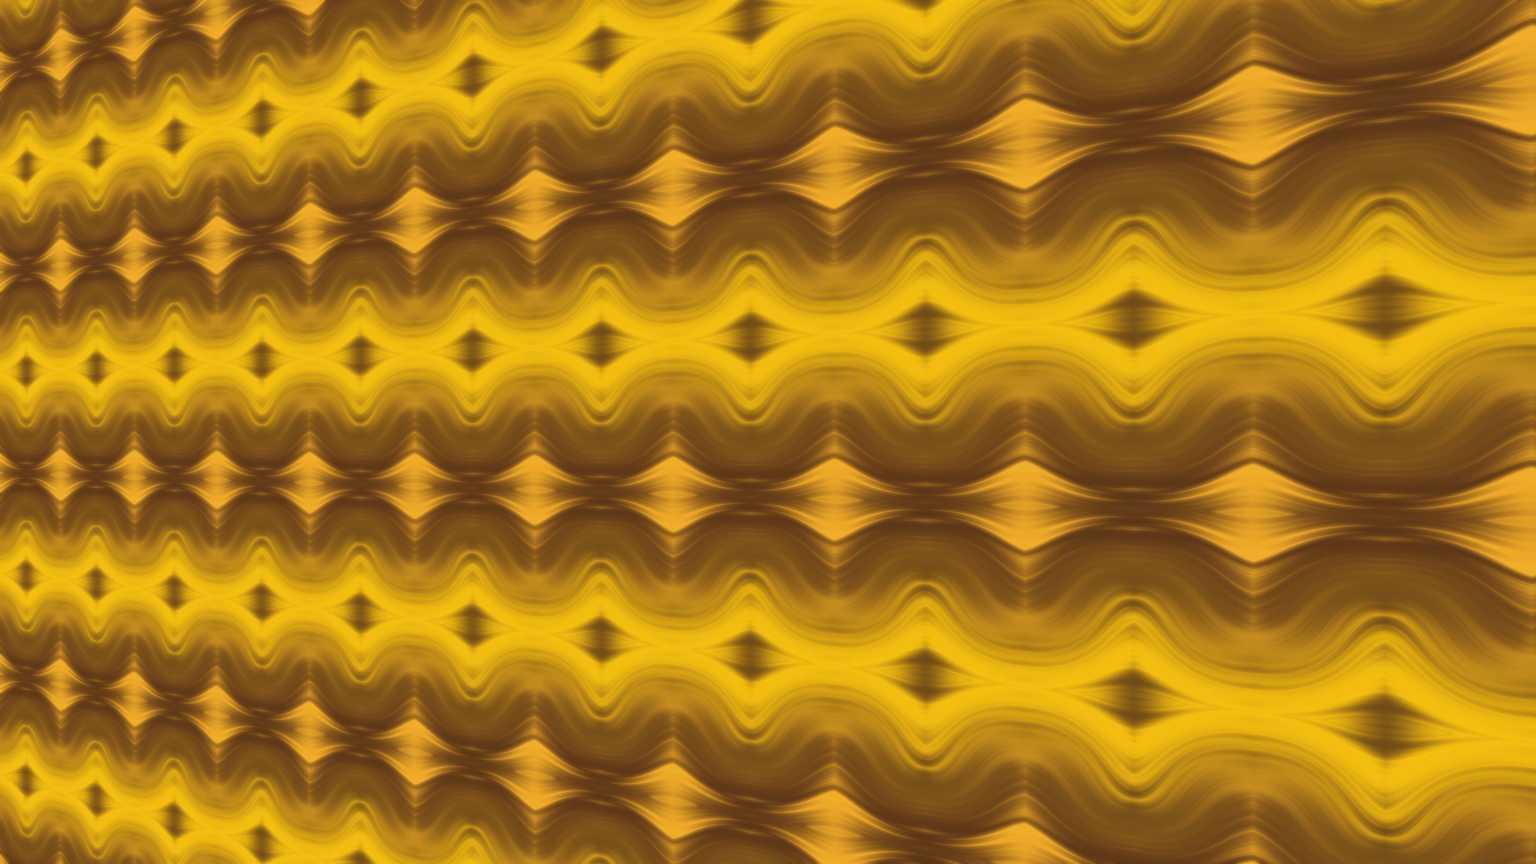 4K Golden Abstract Screensaver || Free To Use Motion Background || FREE DOWNLOAD